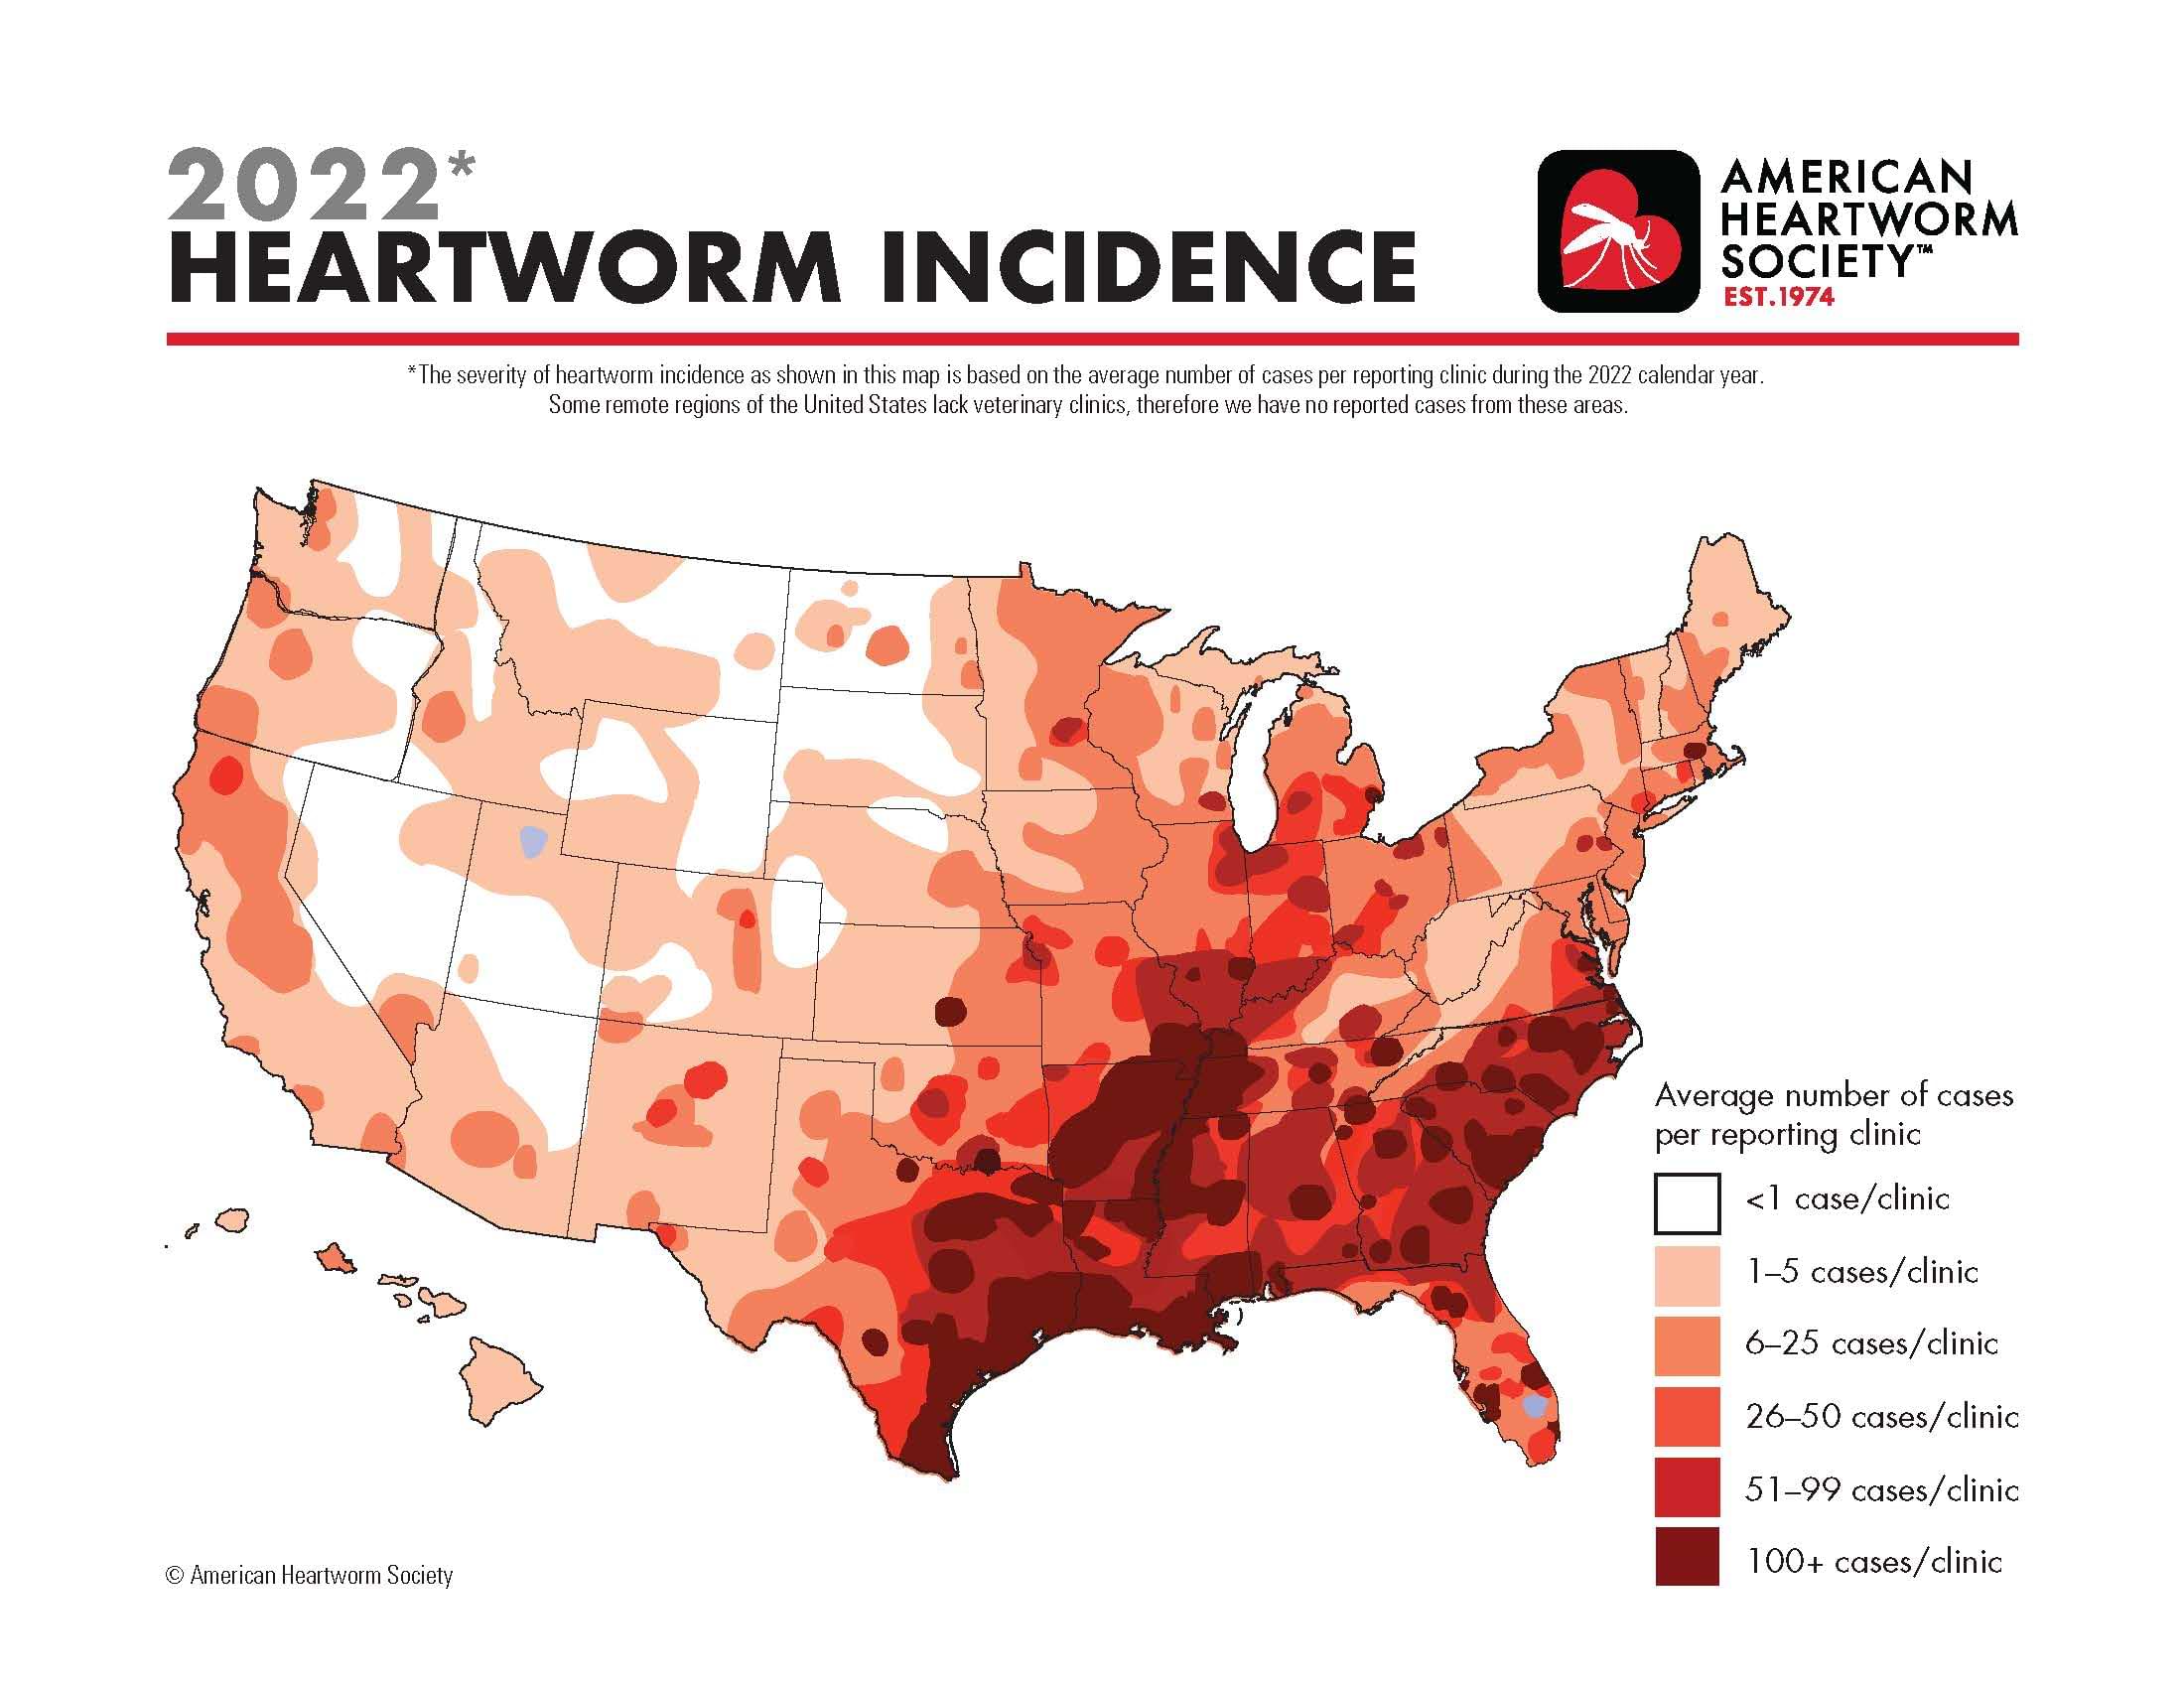 Heartworm Remains Serious Threat to U.S. Pets